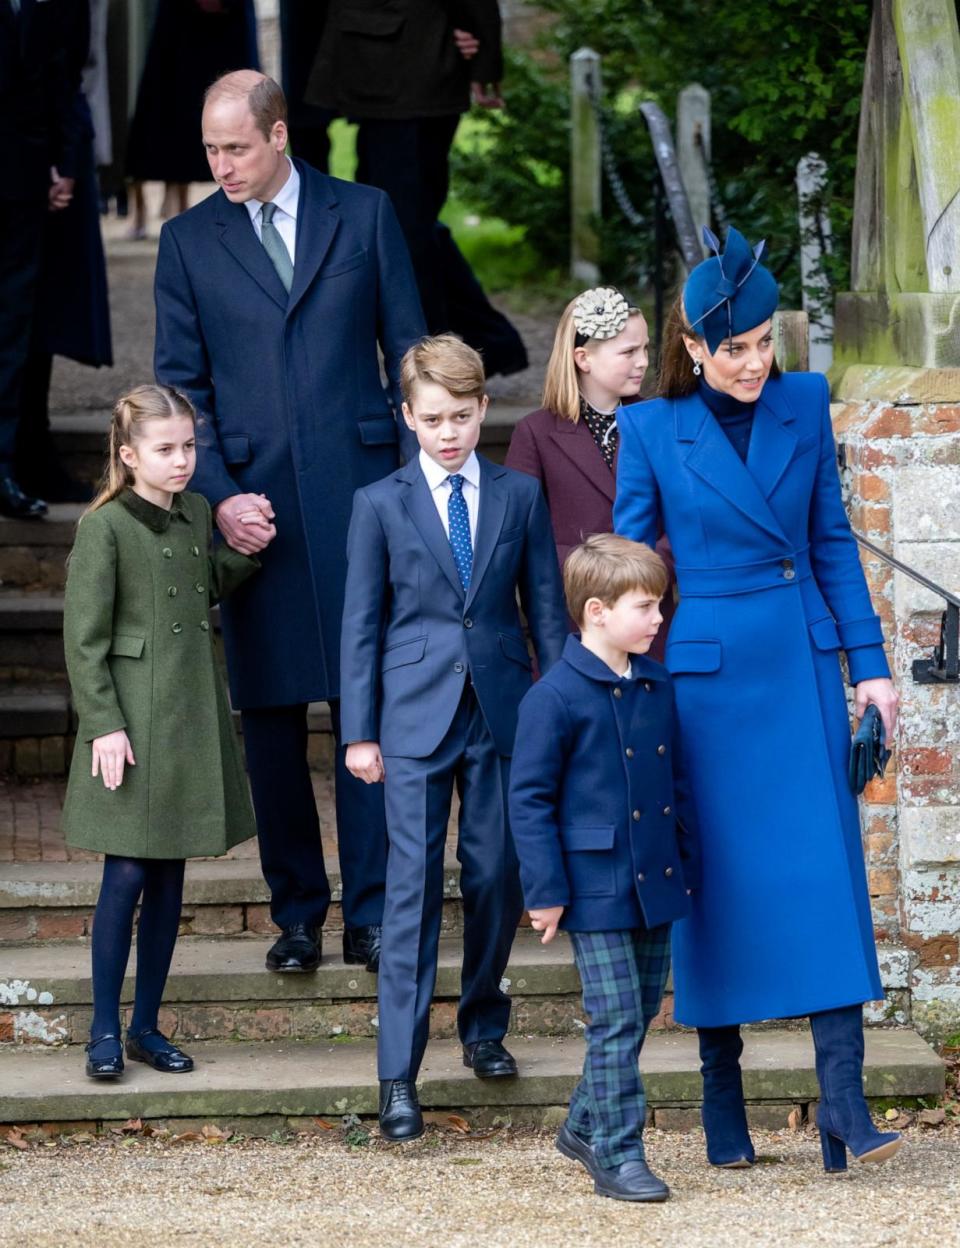 PHOTO: The British Royal family attend the Christmas morning service. (Samir Hussein/WireImage/Getty Images)